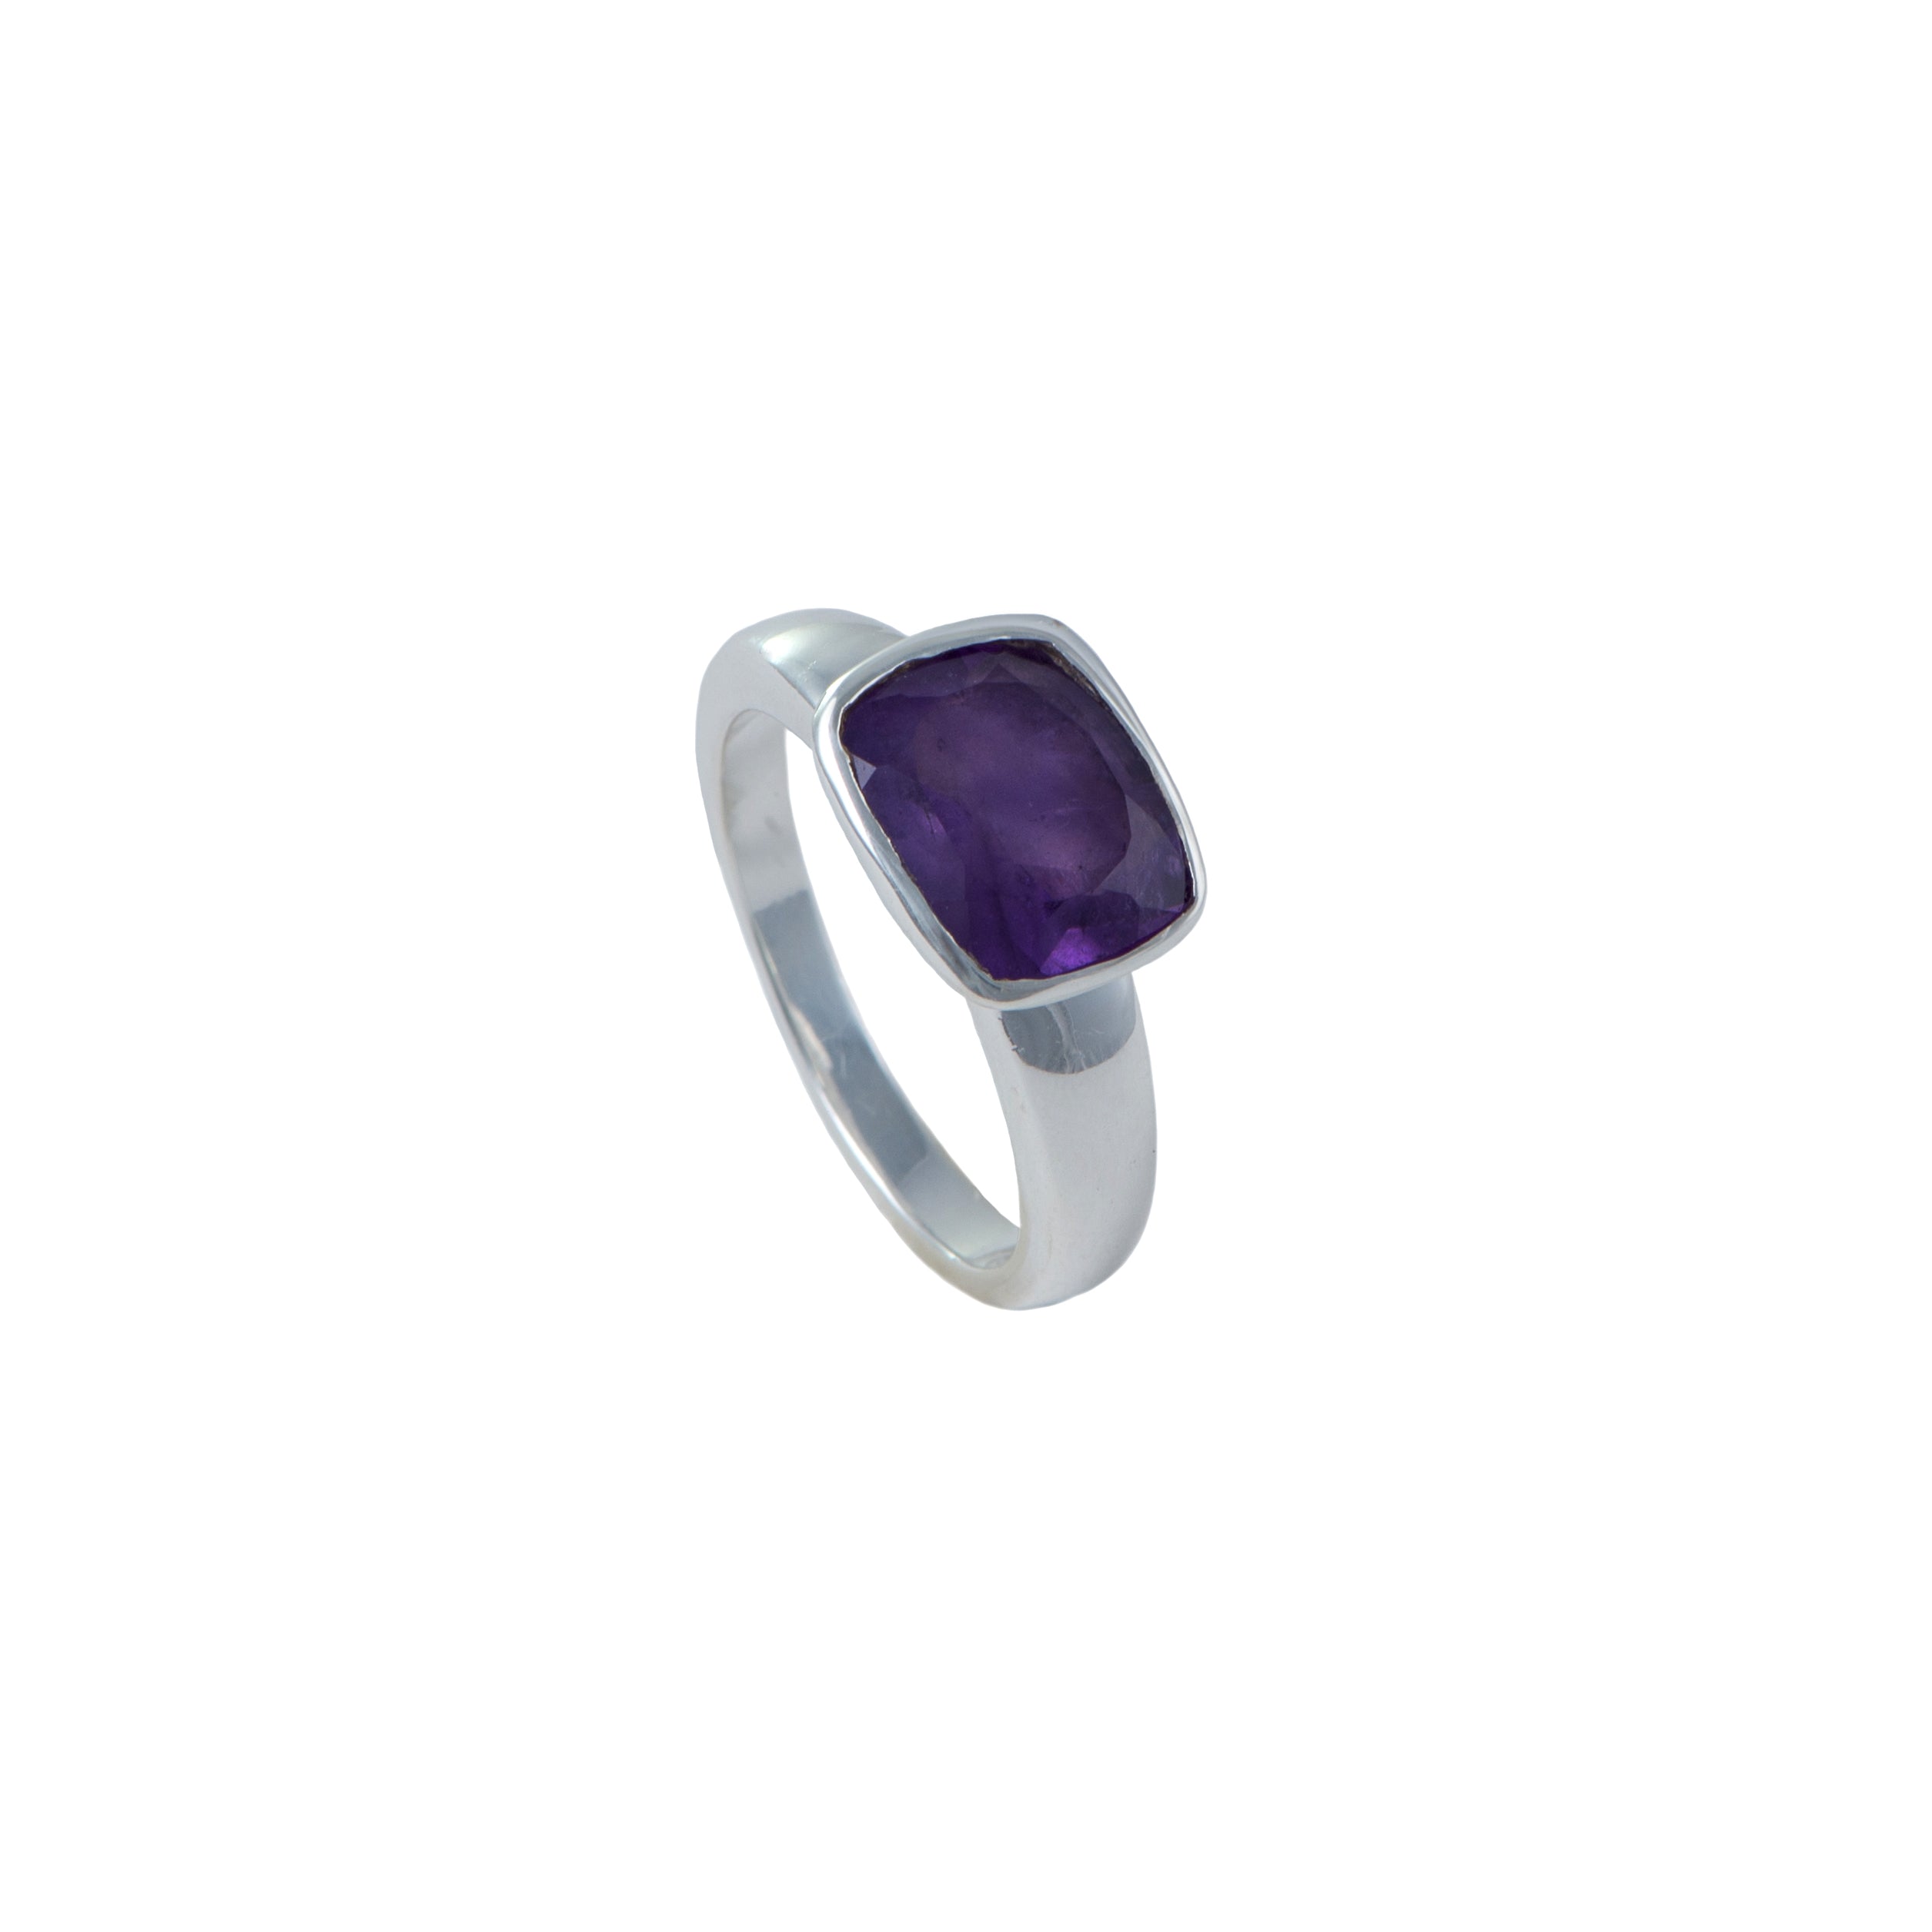 Faceted Rectangular Cut Natural Gemstone Sterling Silver Ring - Amethyst